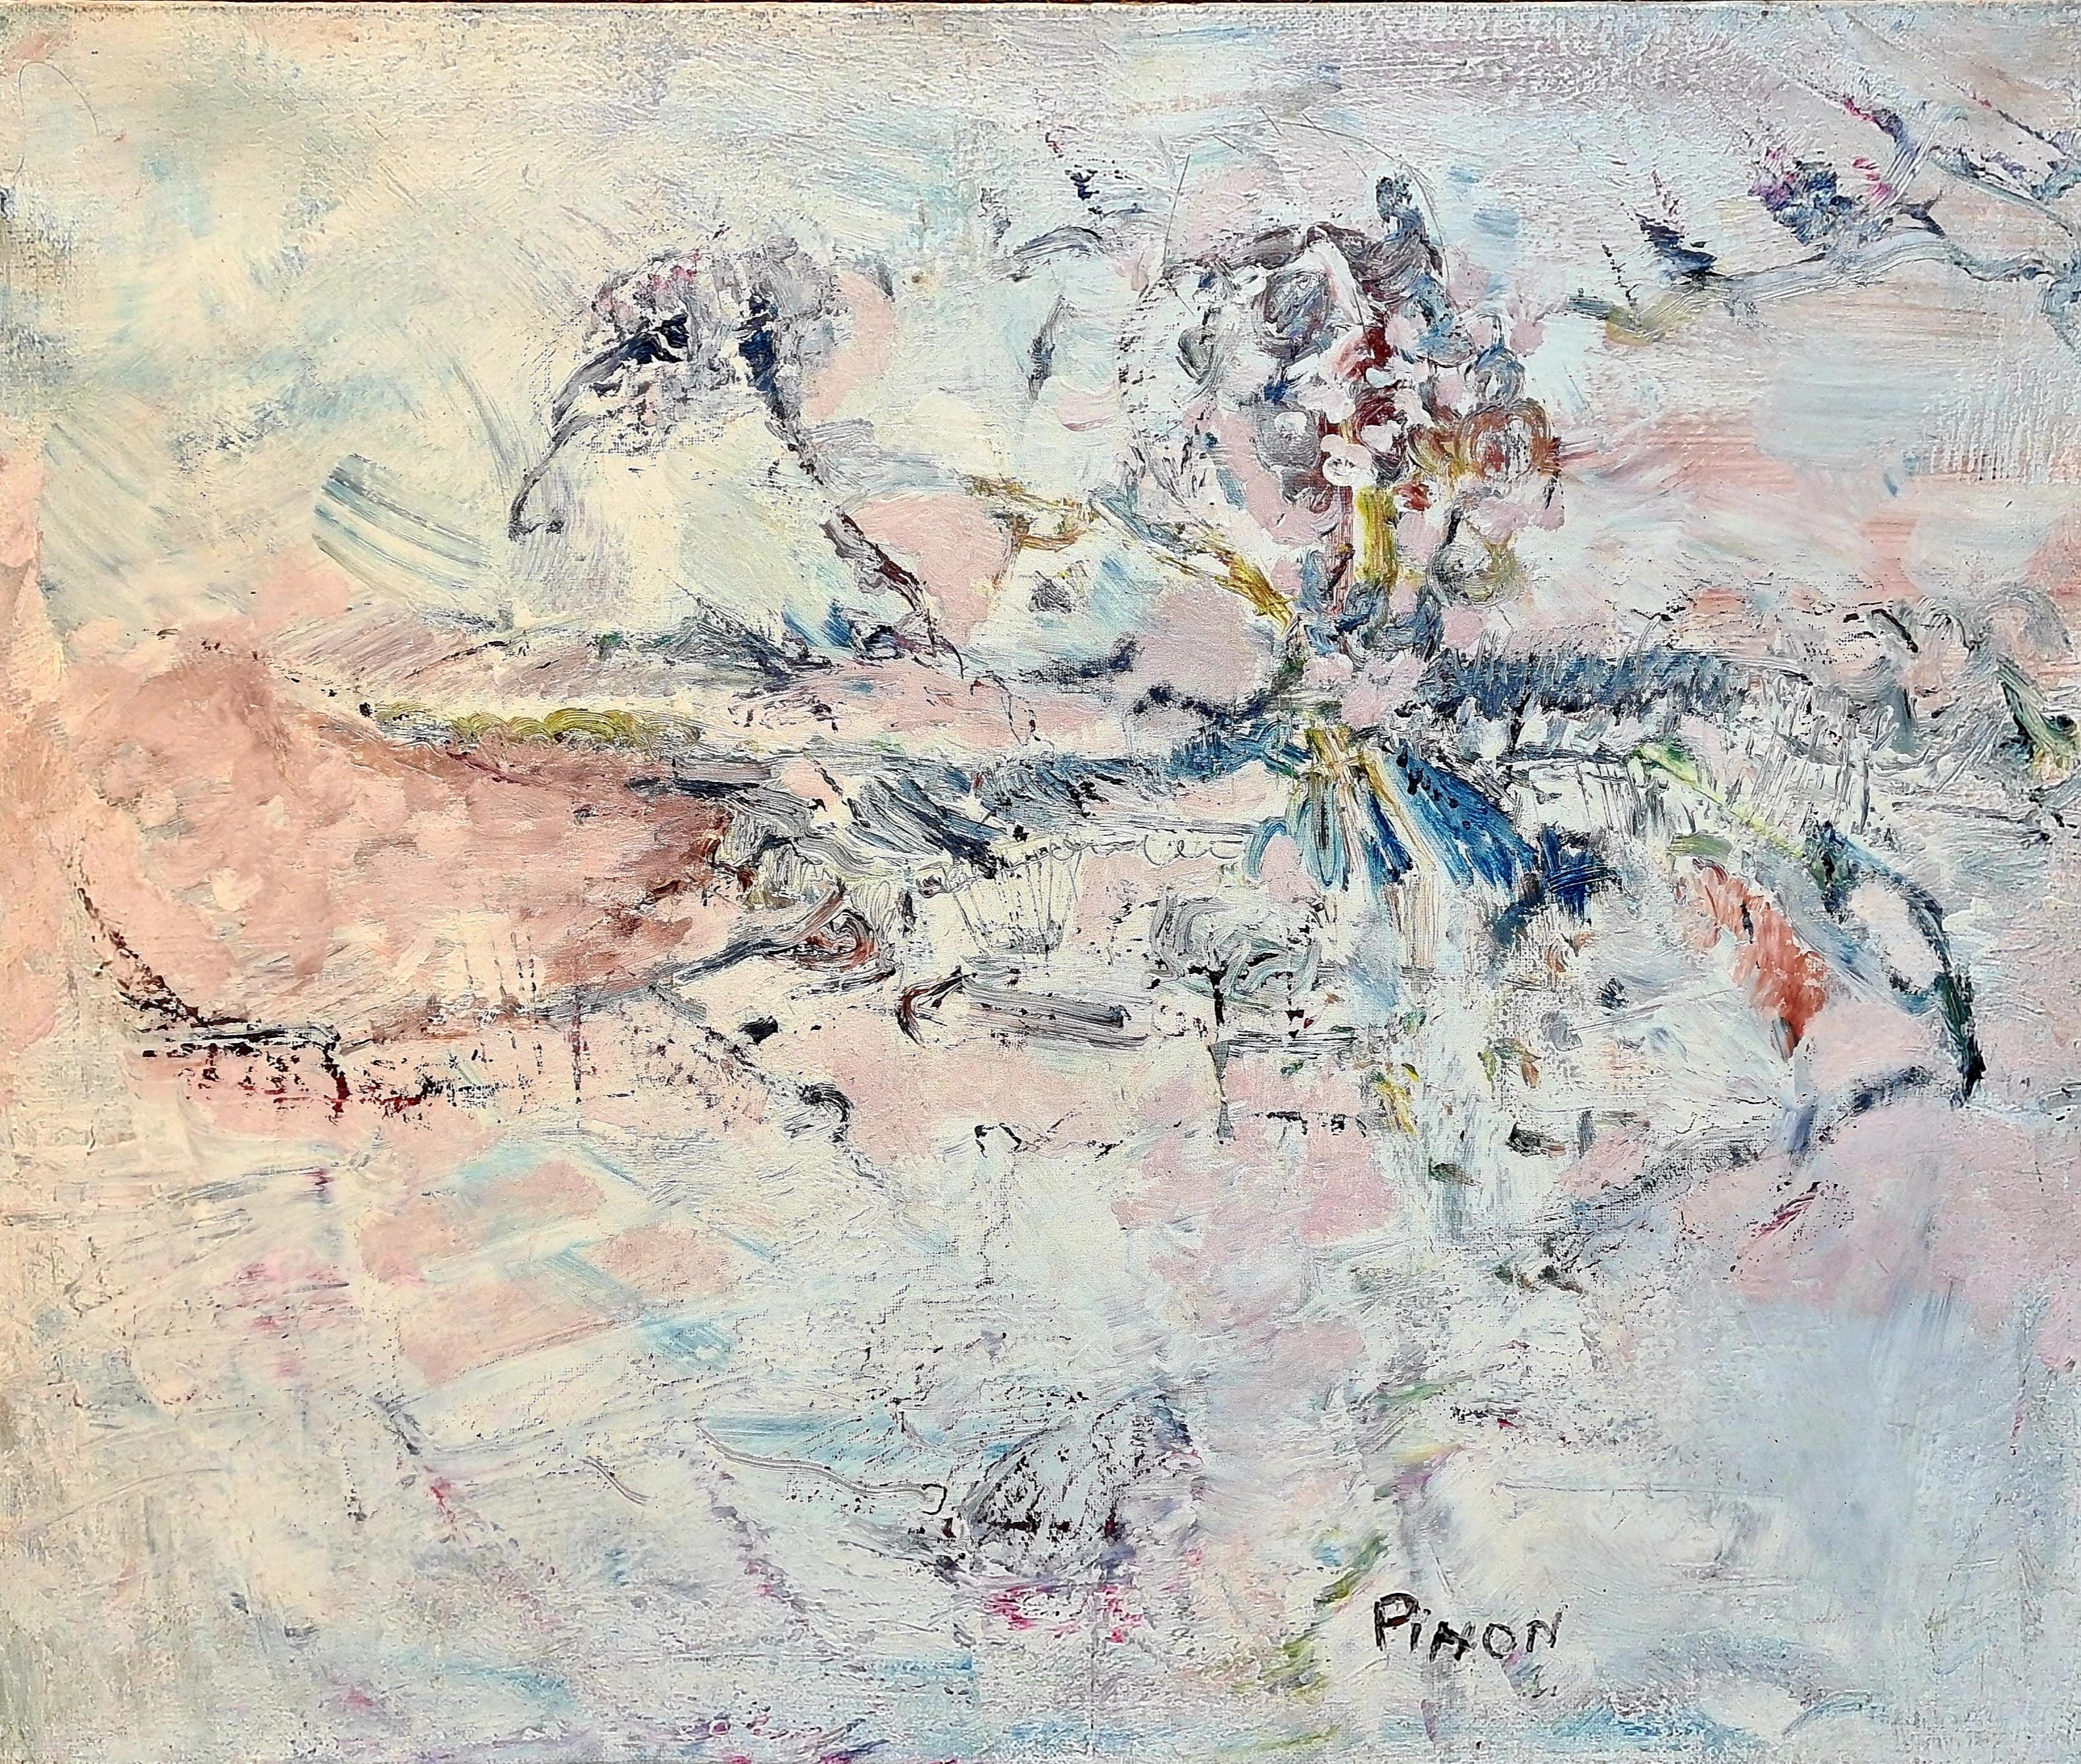 Jacques Pinon Abstract Painting – The Awakening of a Landscape, Eveil D'un Paysage, Französisches expressionistisches Ölgemälde 